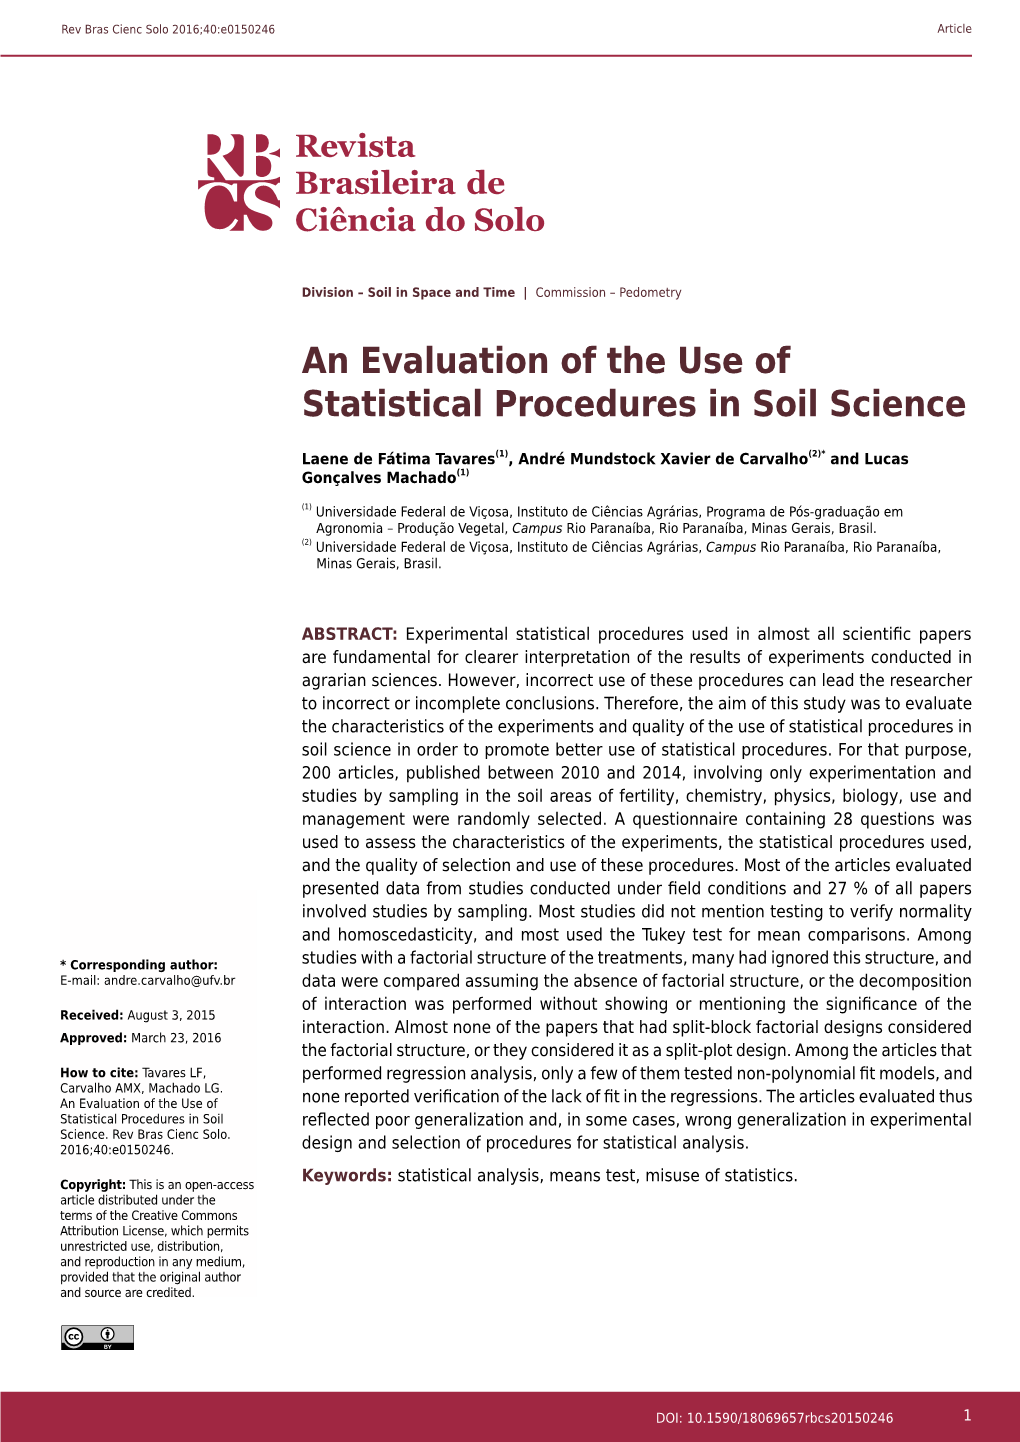 An Evaluation of the Use of Statistical Procedures in Soil Science